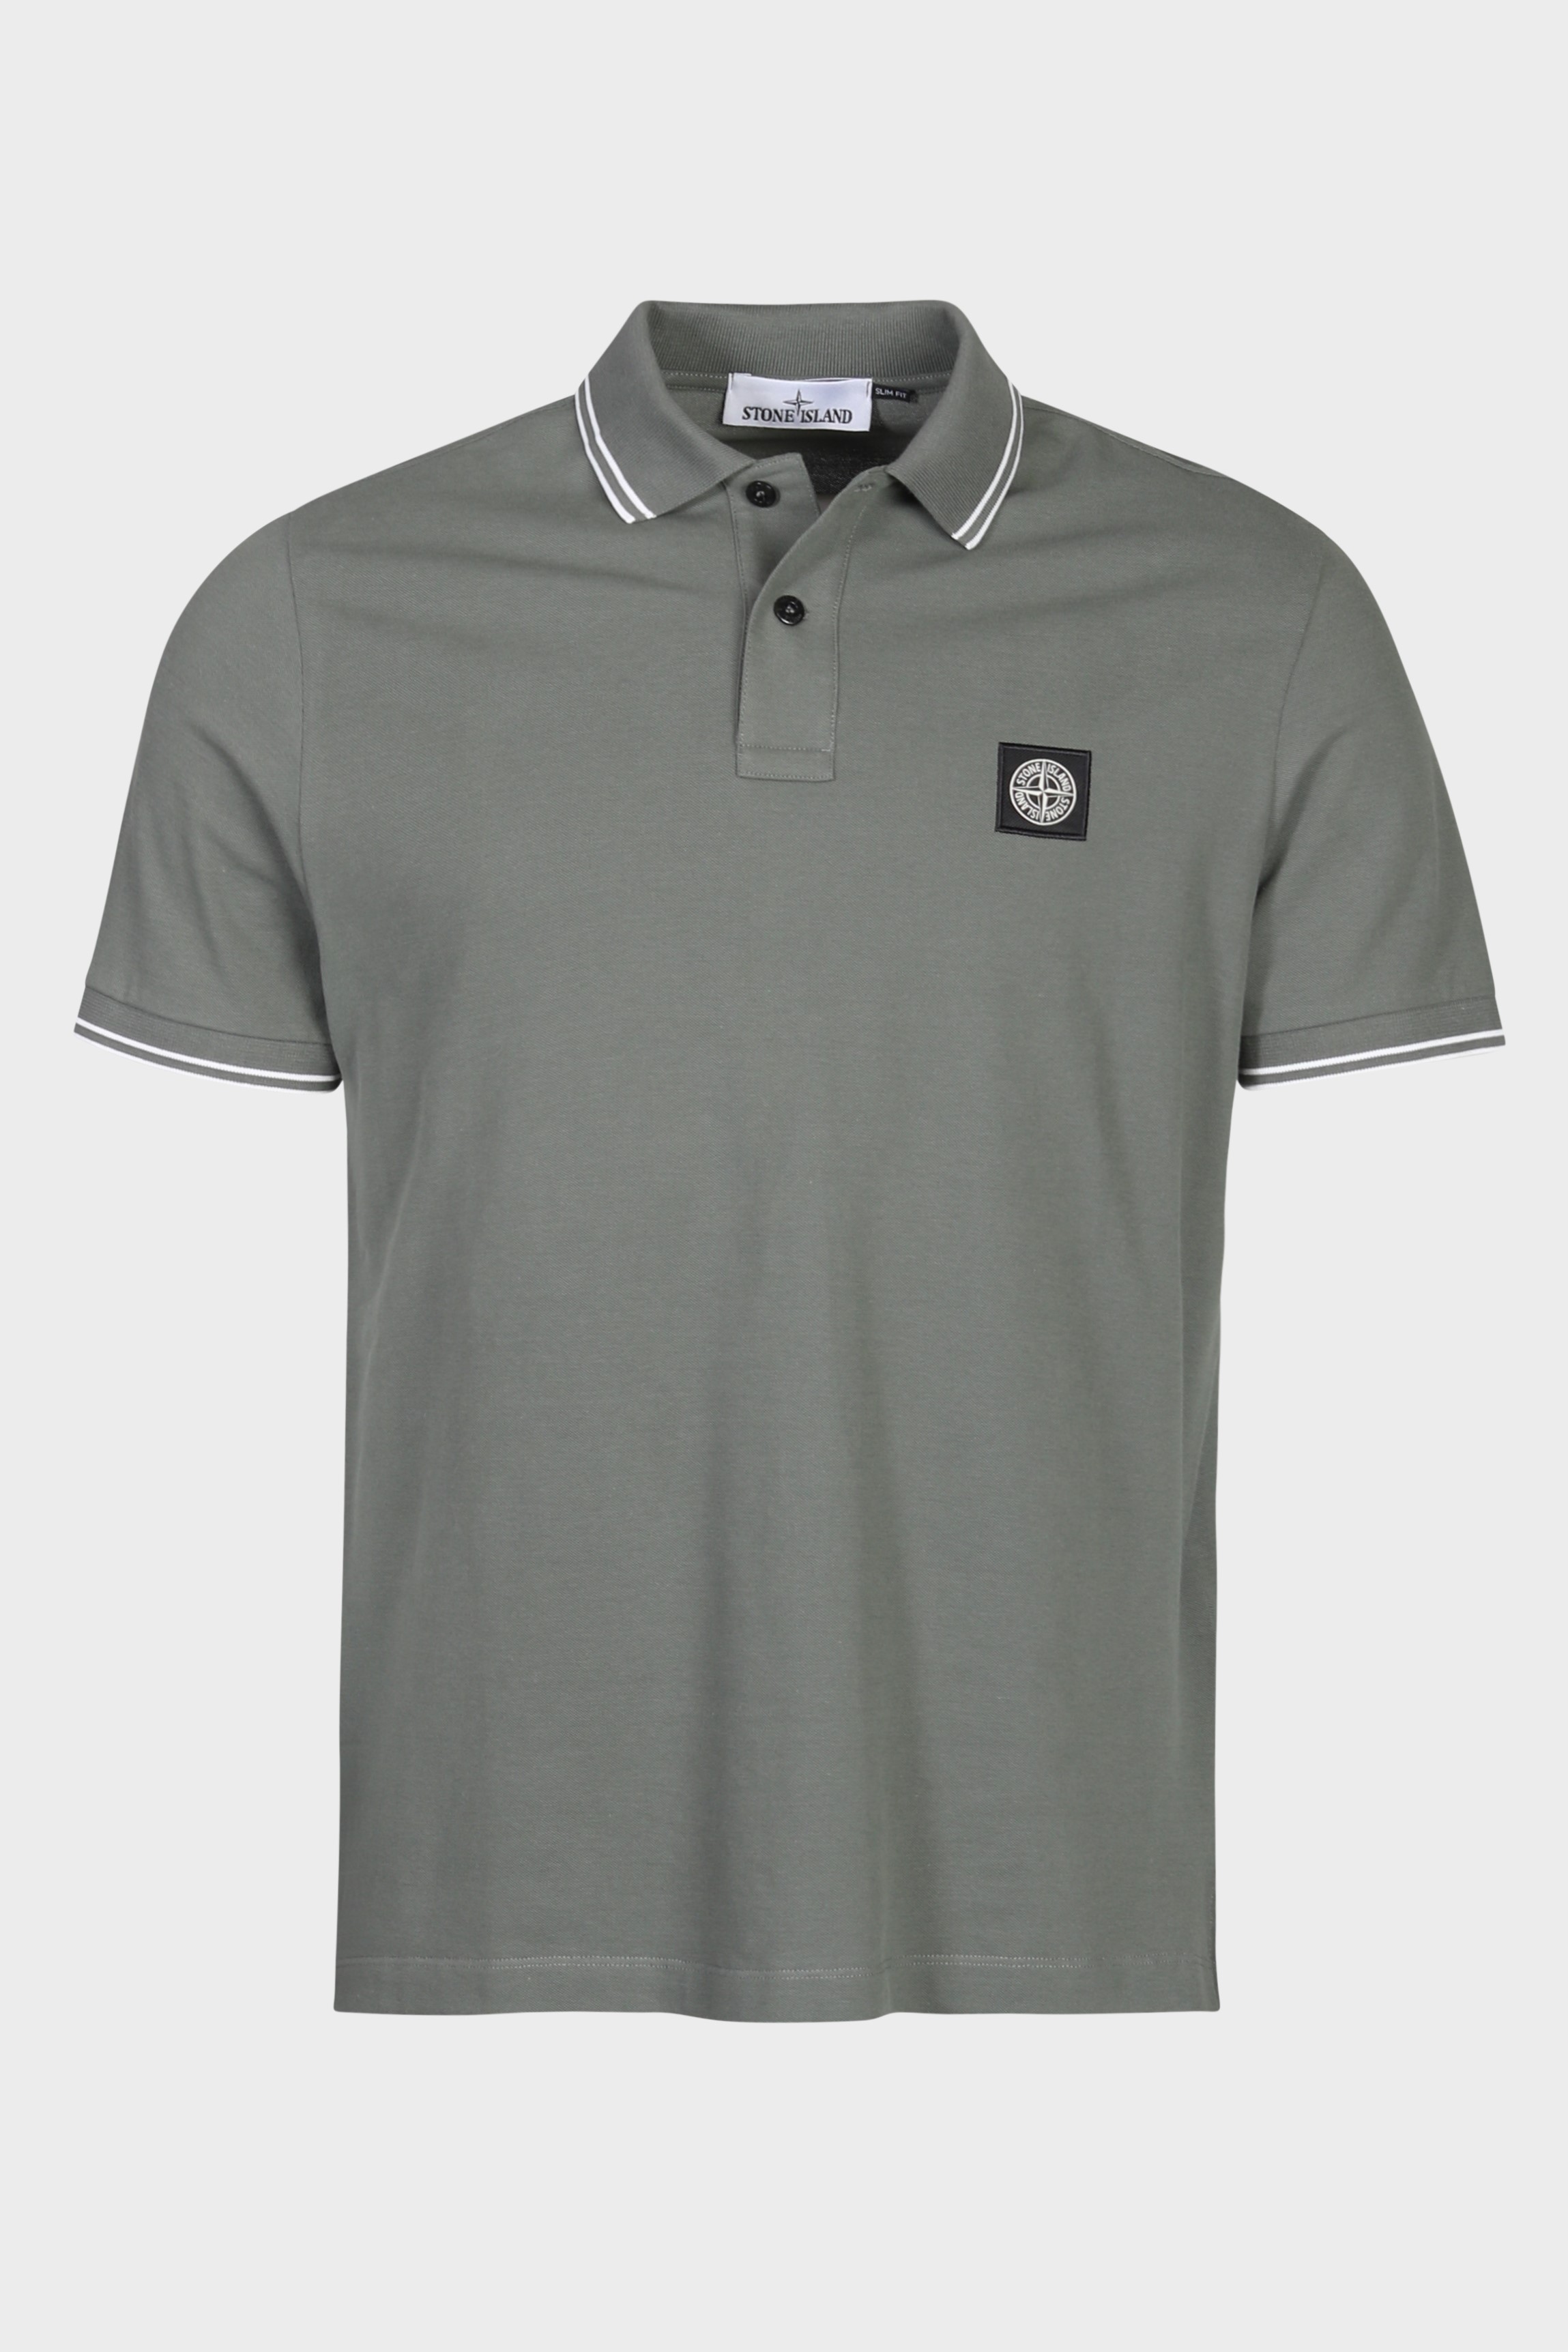 STONE ISLAND Slim Fit Polo Shirt in Green